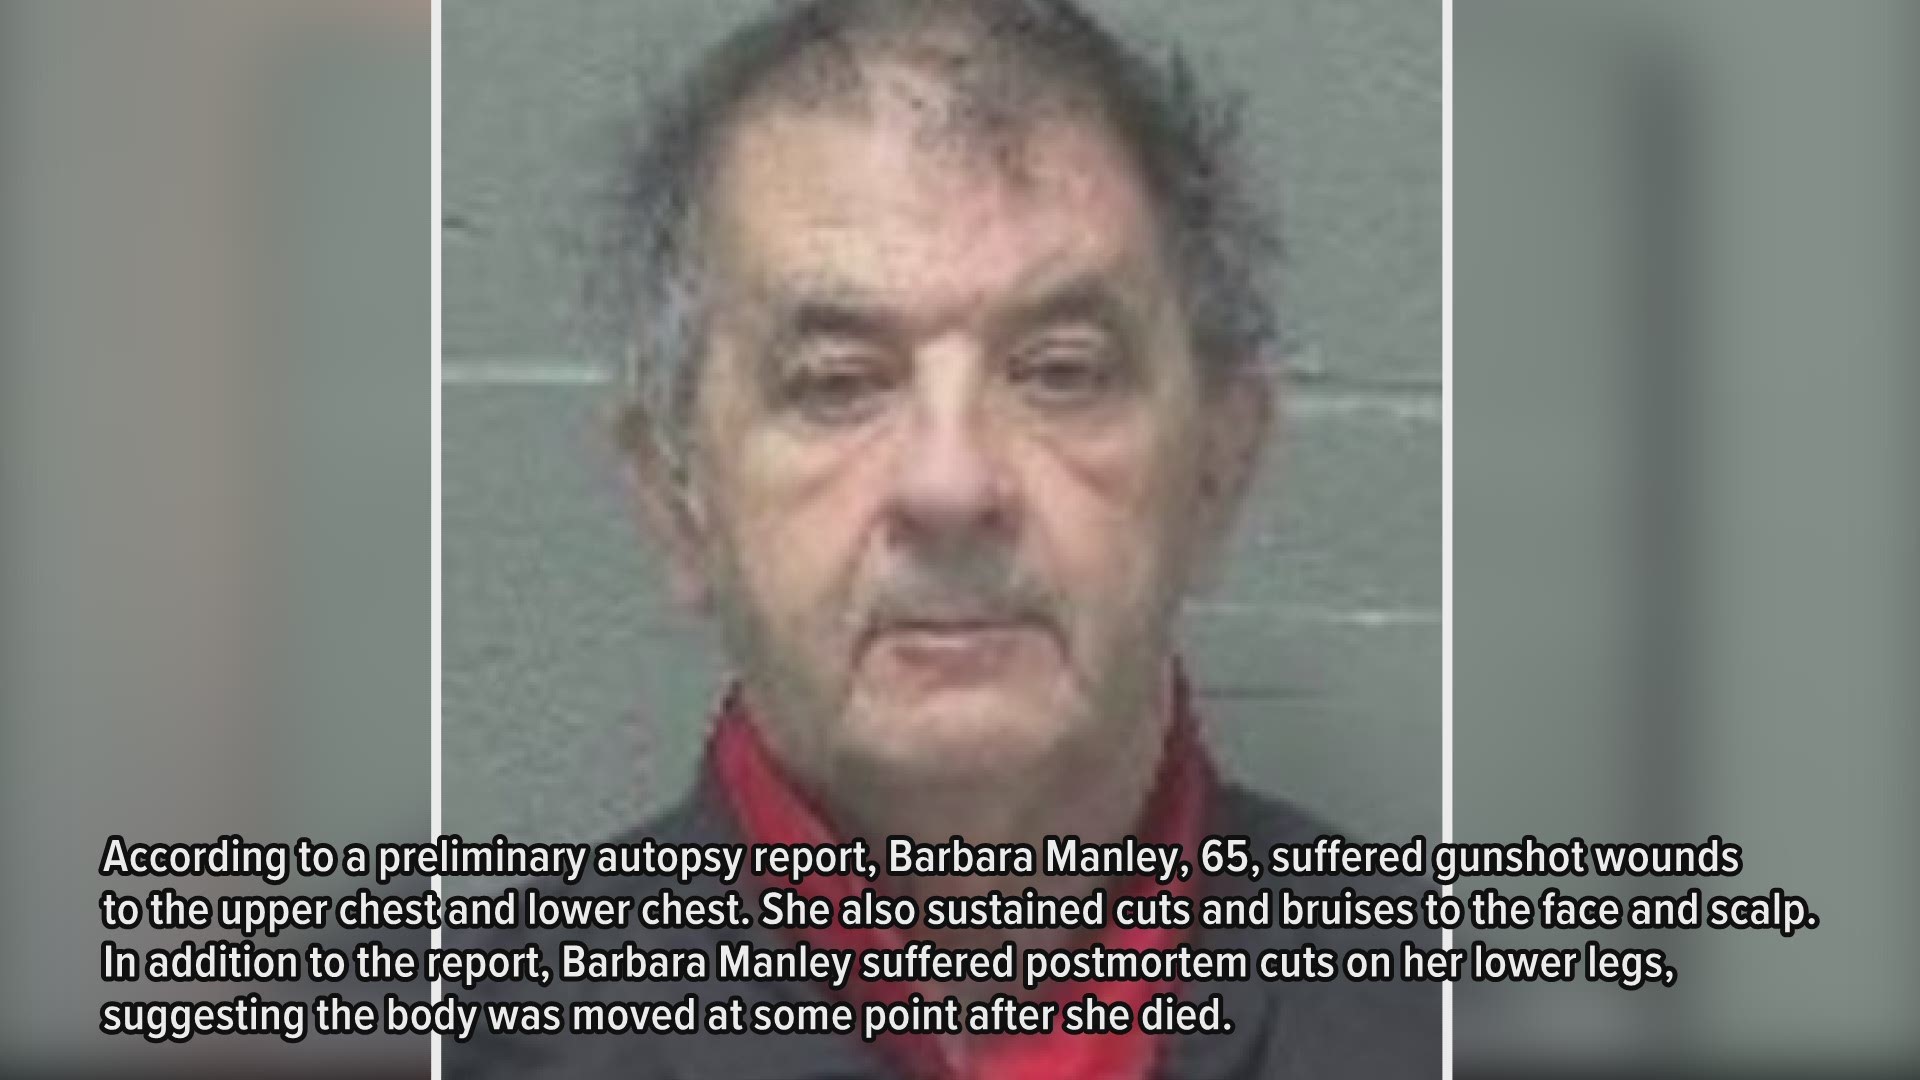 Clyde Manley Jr. faces charges of aggravated murder and murder, both with firearm specifications, tampering with evidence and abuse of a corpse.